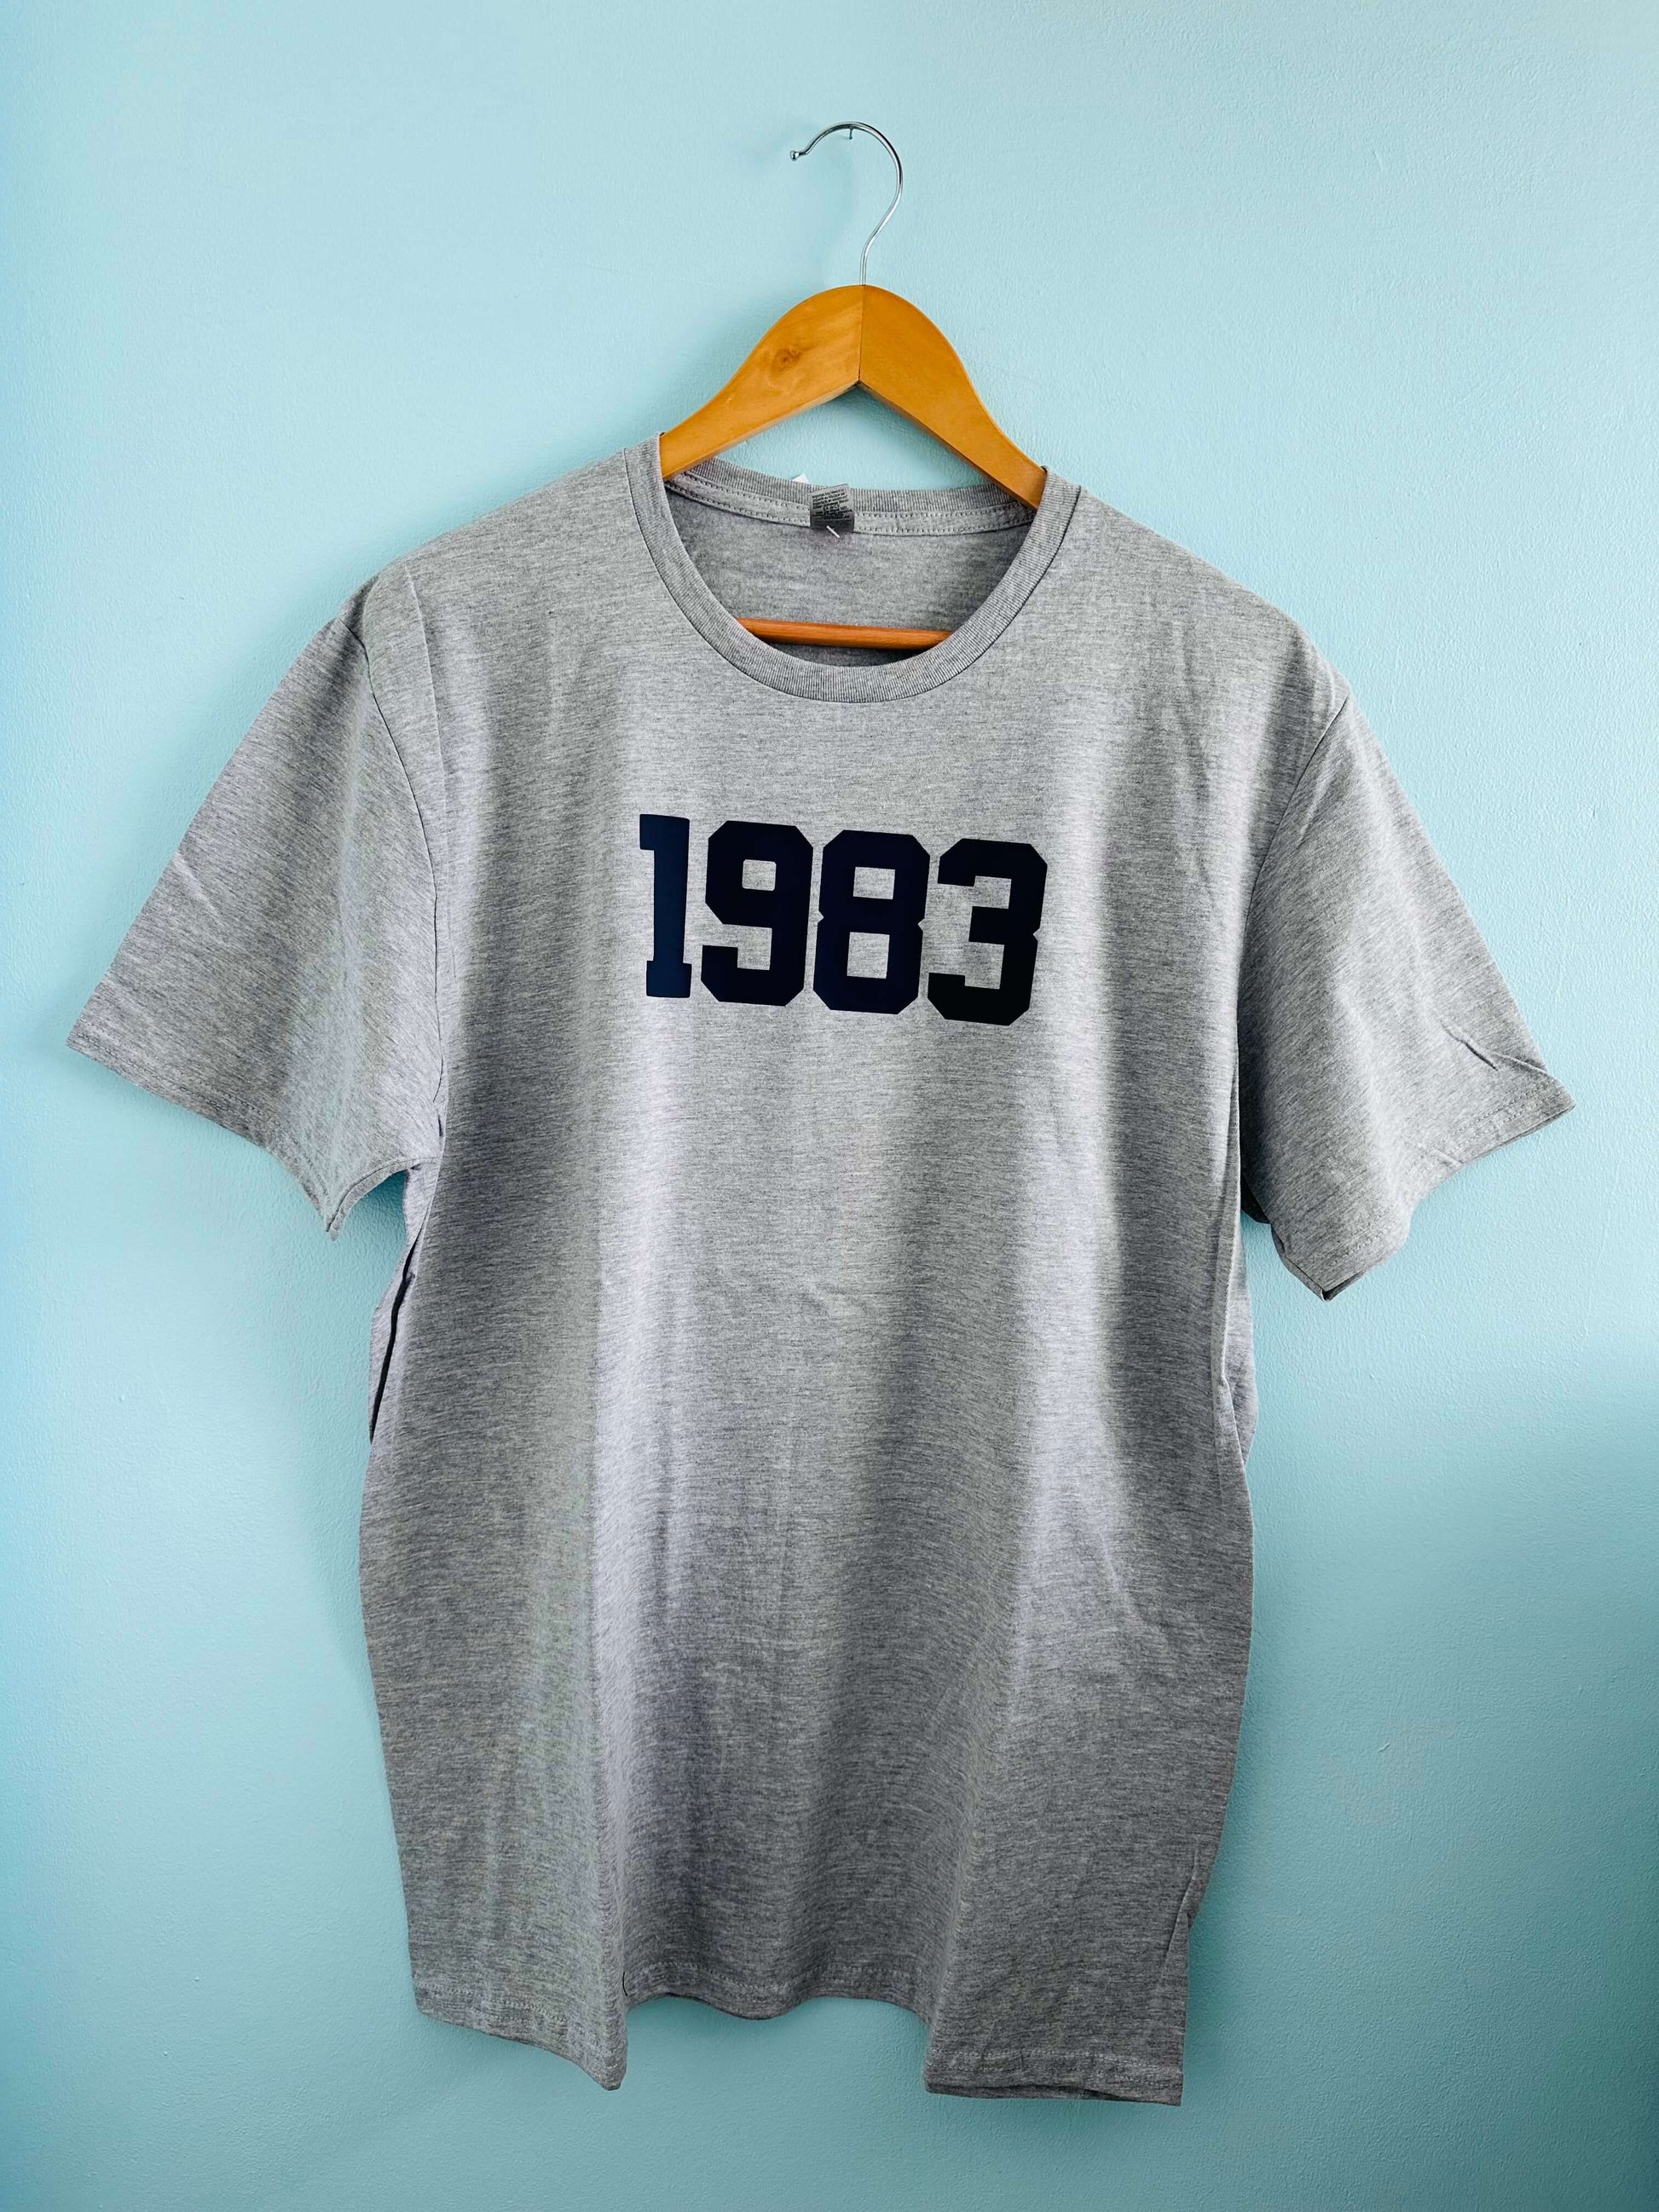 Crew neck T-shirt with Retro personalised year design